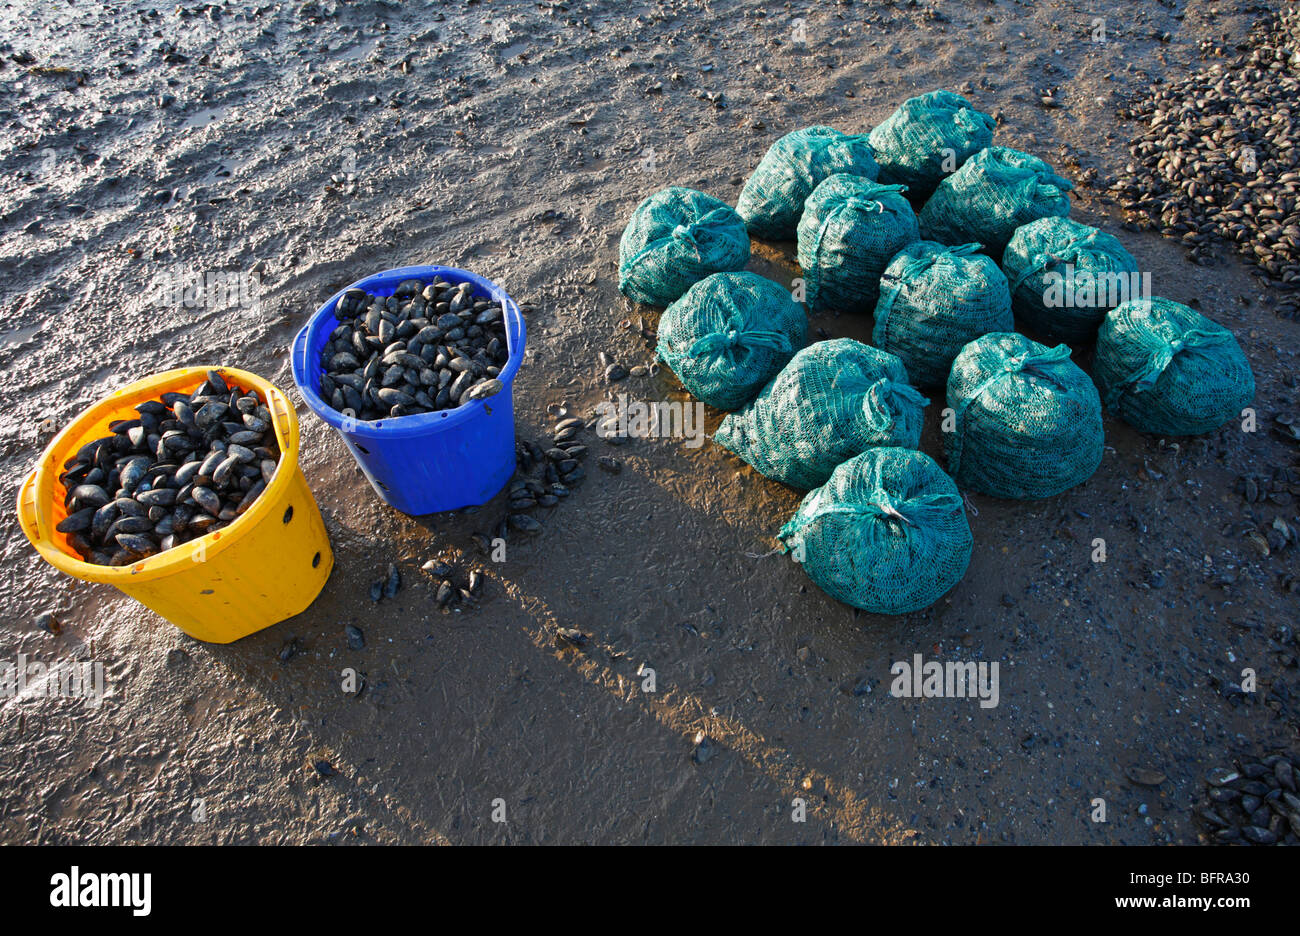 Buckets and bags of freshly caught mussels at Brancaster Staithe on the North Norfolk coast. Stock Photo